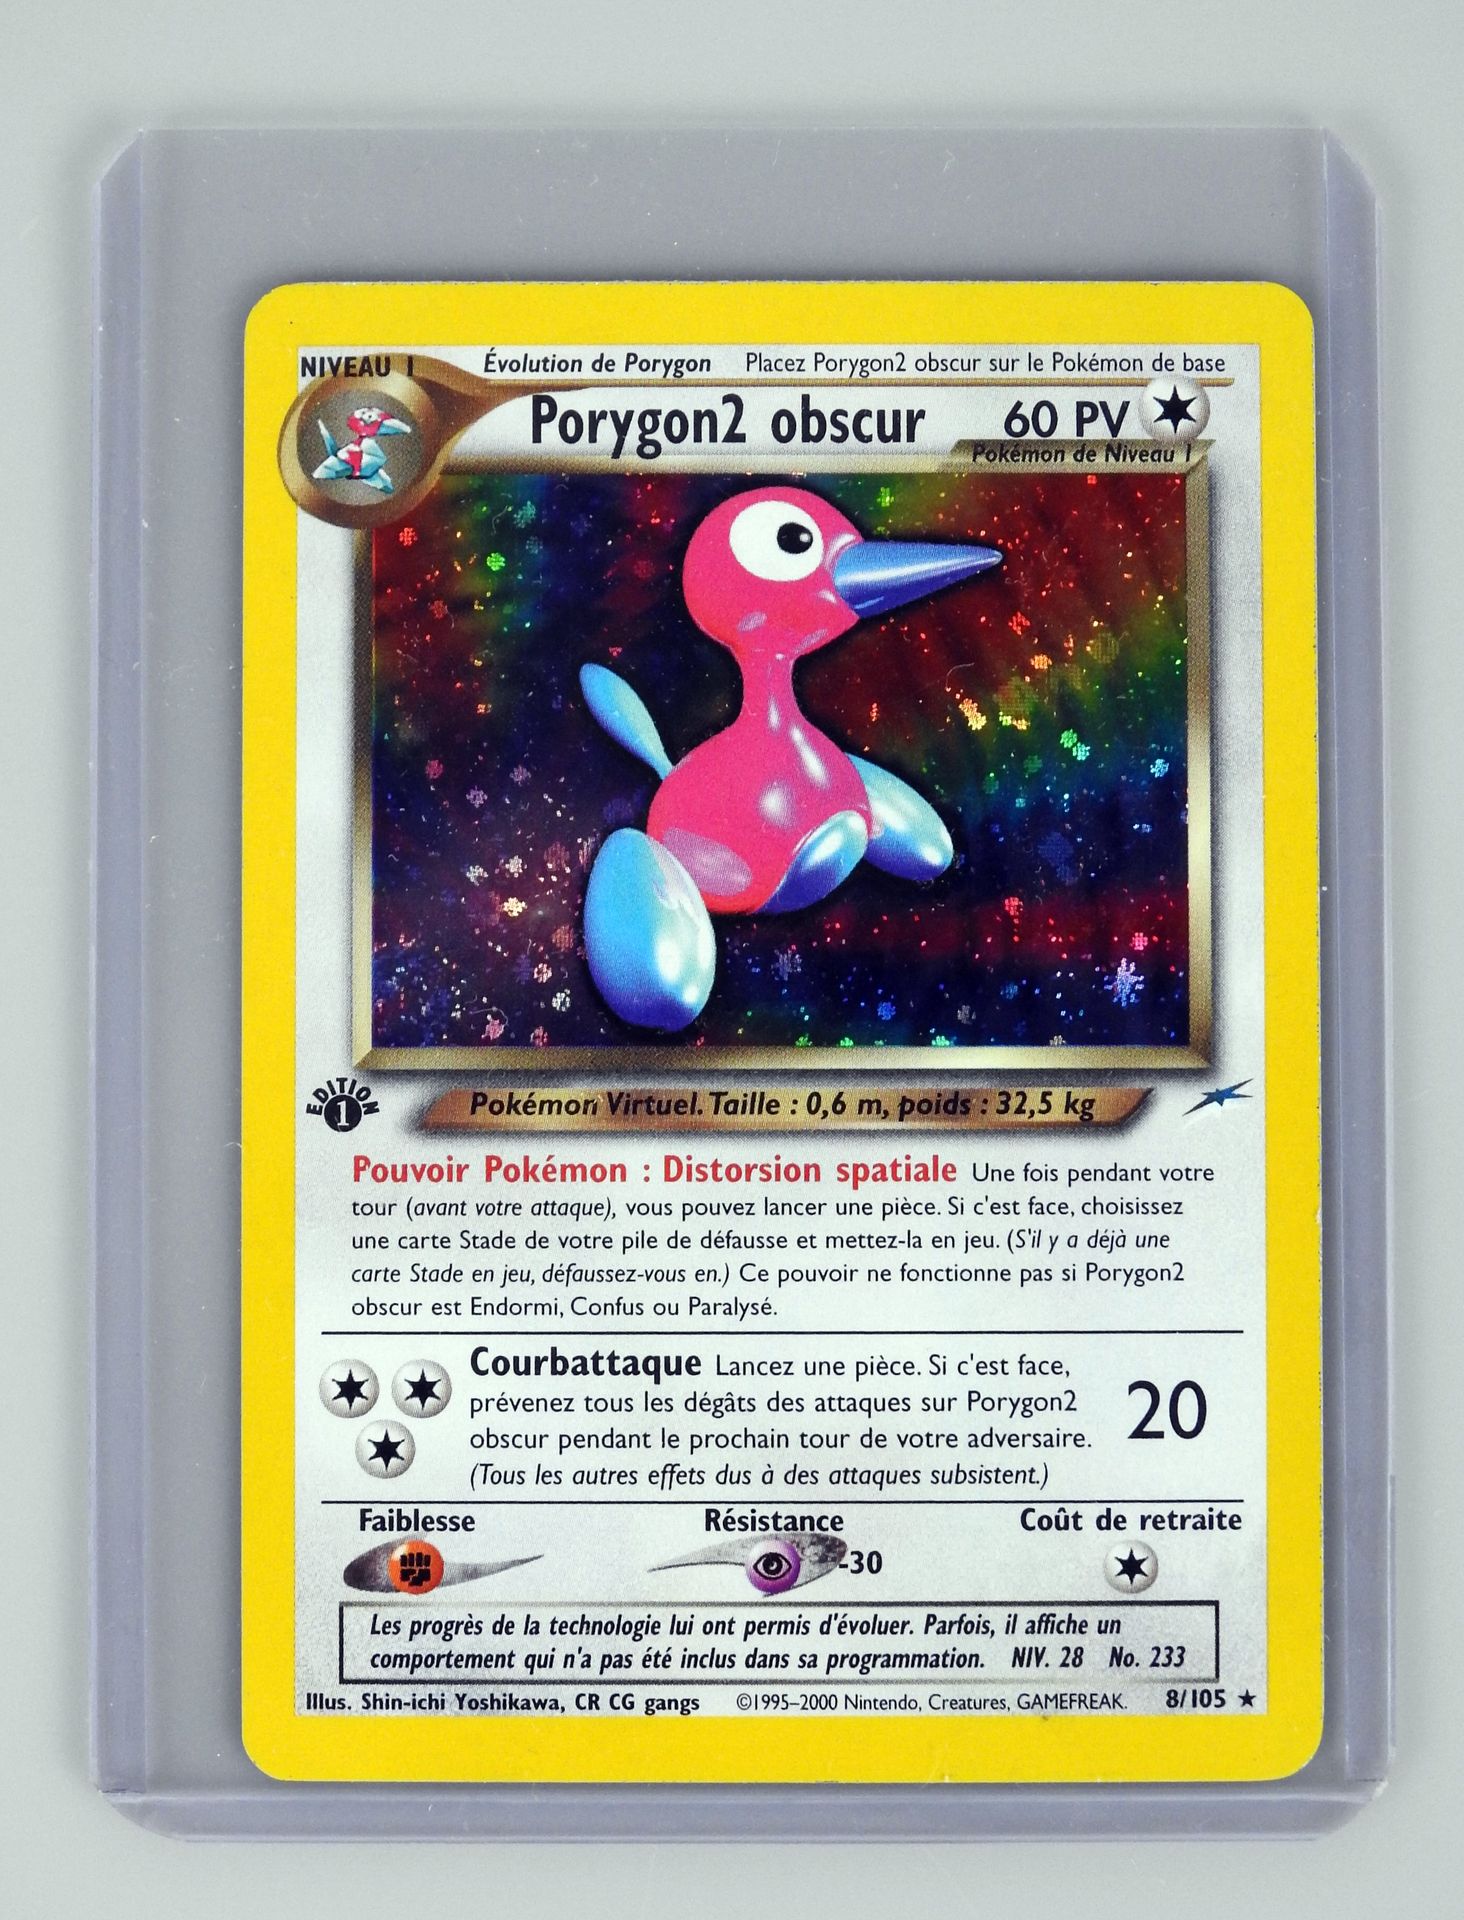 Null PORYGON 2 OBSCUR Ed 1

Wizards Neo Destiny 8/105 block

Pokemon card in gre&hellip;